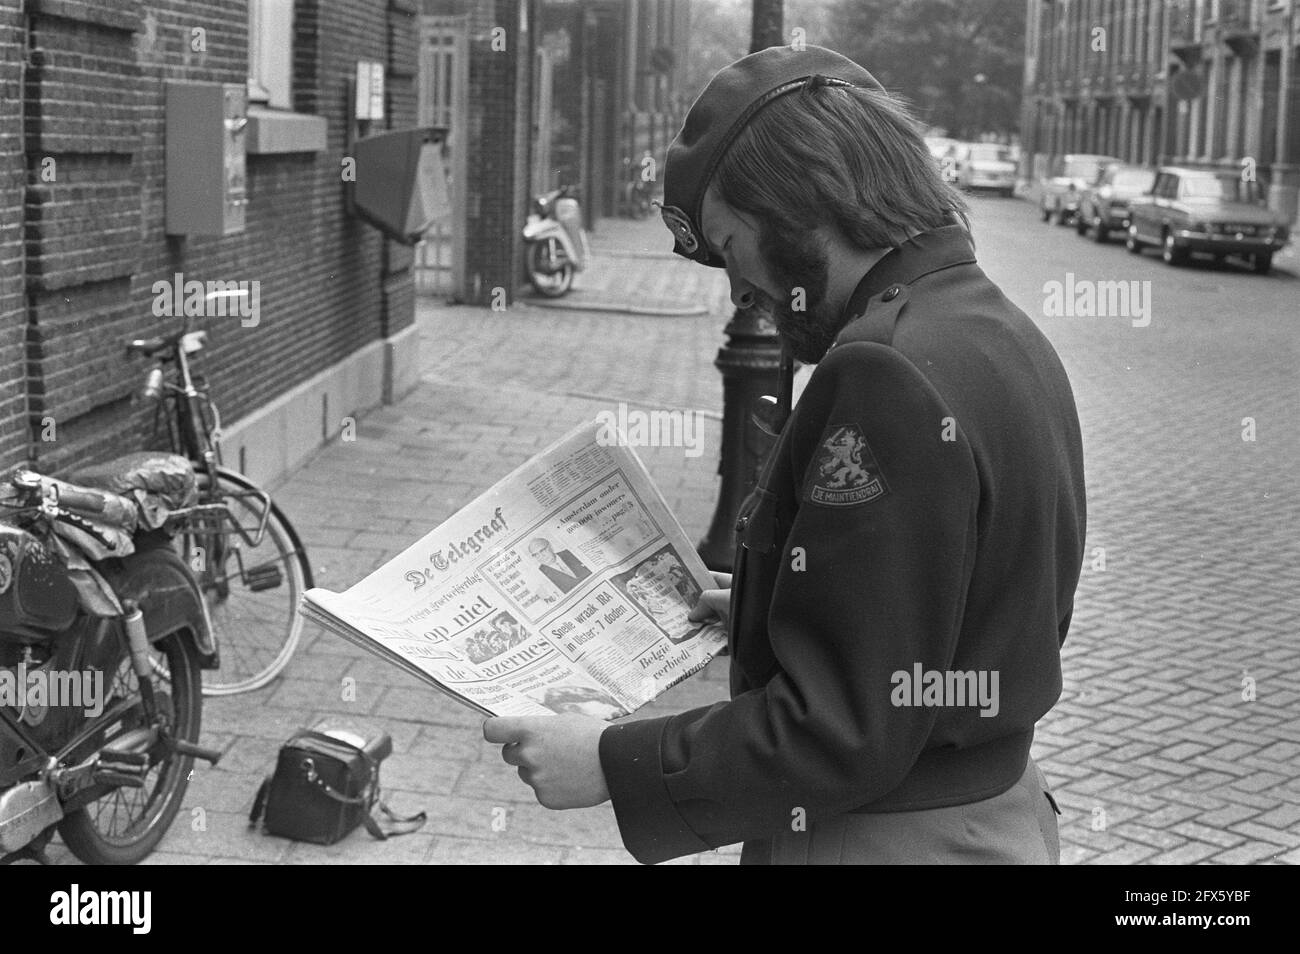 Greetings day, soldier reads newspaper about action at barracks in Amsterdam, August 1, 1972, ANTIES, barracks, newspapers, soldiers, The Netherlands, 20th century press agency photo, news to remember, documentary, historic photography 1945-1990, visual stories, human history of the Twentieth Century, capturing moments in time Stock Photo